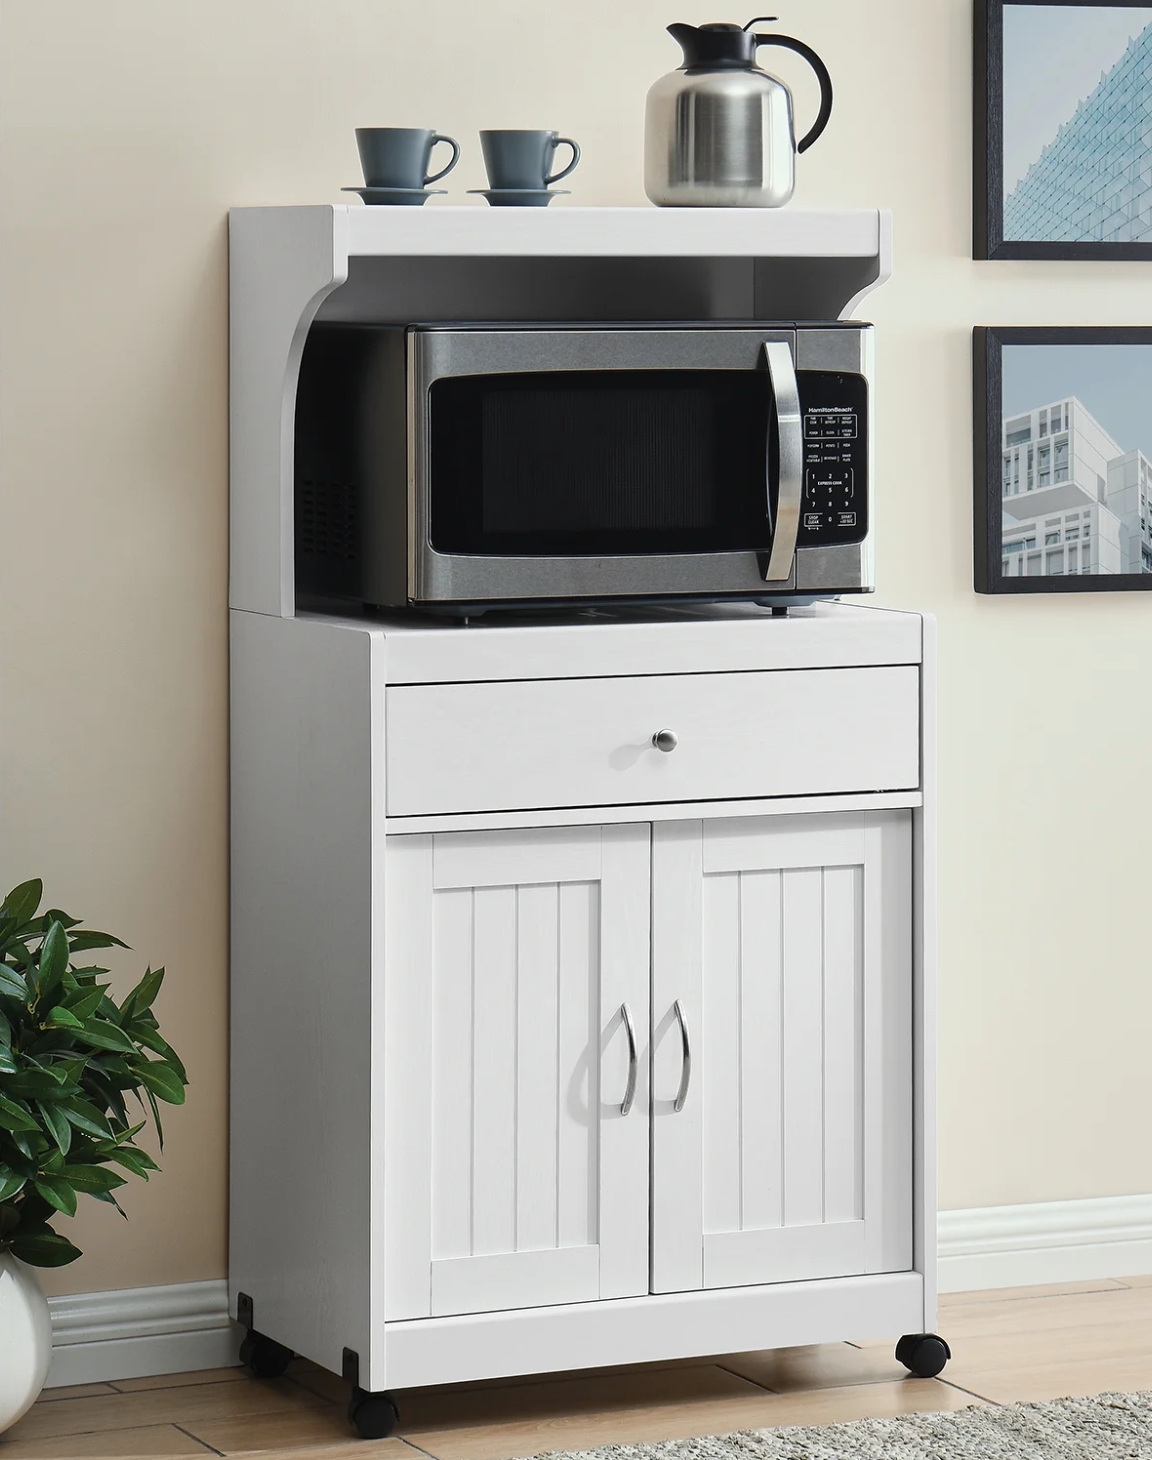 White microwave cart with cabinet, nook, and top shelf storing microwave and two mugs and coffee container